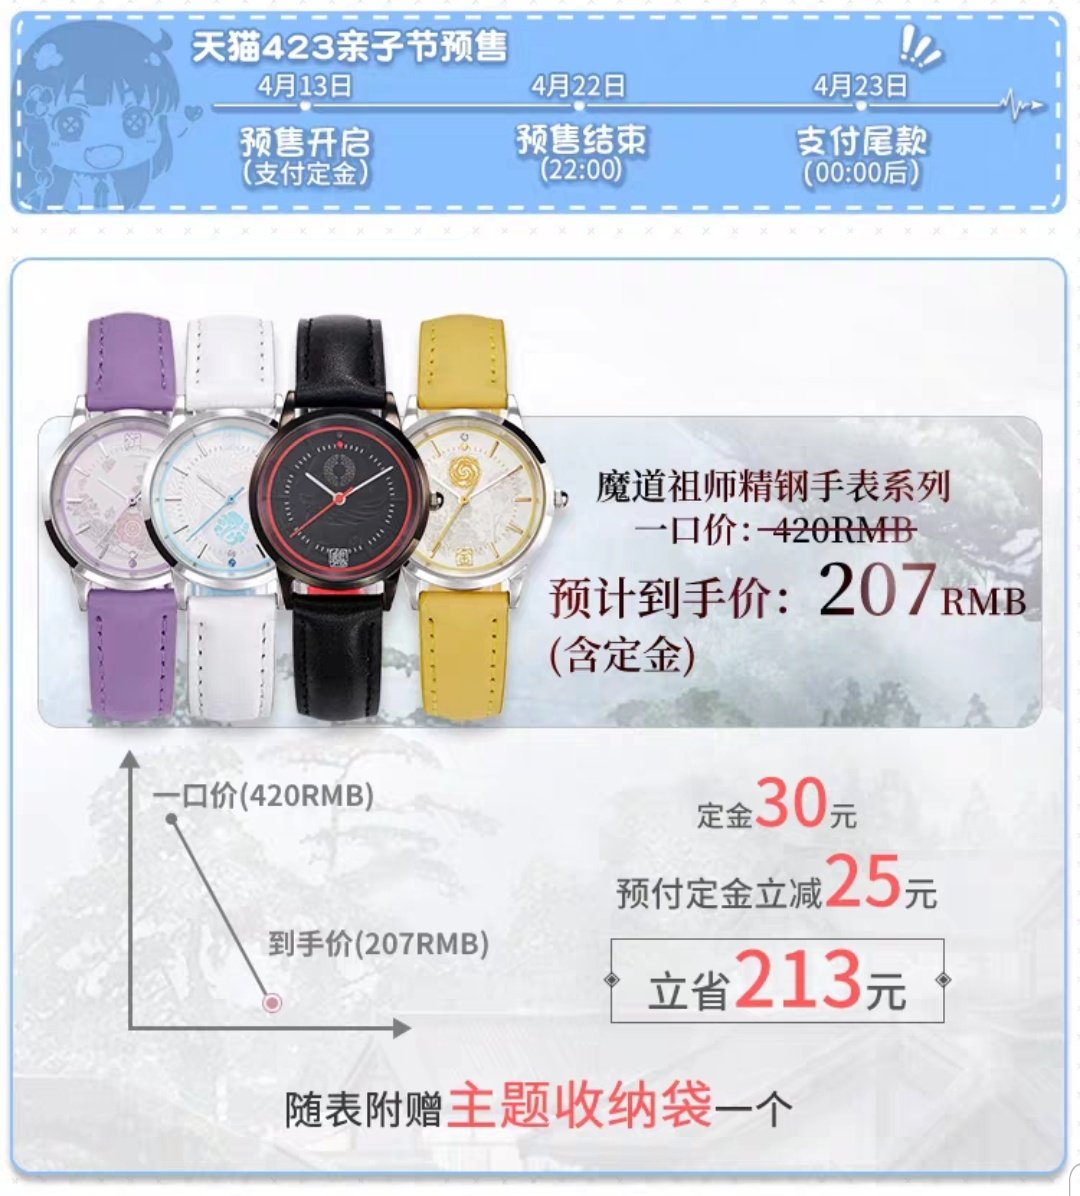 MDZS x XINGYUNSHI THE WATCHES ARE BACK WITH A DESIGN FOR LANLING JIN FAMILY THERE'S A PROMO GOING ON WITH LOWER PRICES AND THEY'LL GIVE YOU A MDZS BAG TOOO  #魔道祖师  #魏婴  #魏无羡  #蓝湛  #蓝忘机 #云梦江氏  #江澄  #江厌离  #兰陵金氏  #金子轩  #金凌  https://m.tb.cn/h.V7Zzfo3?sm=79100e